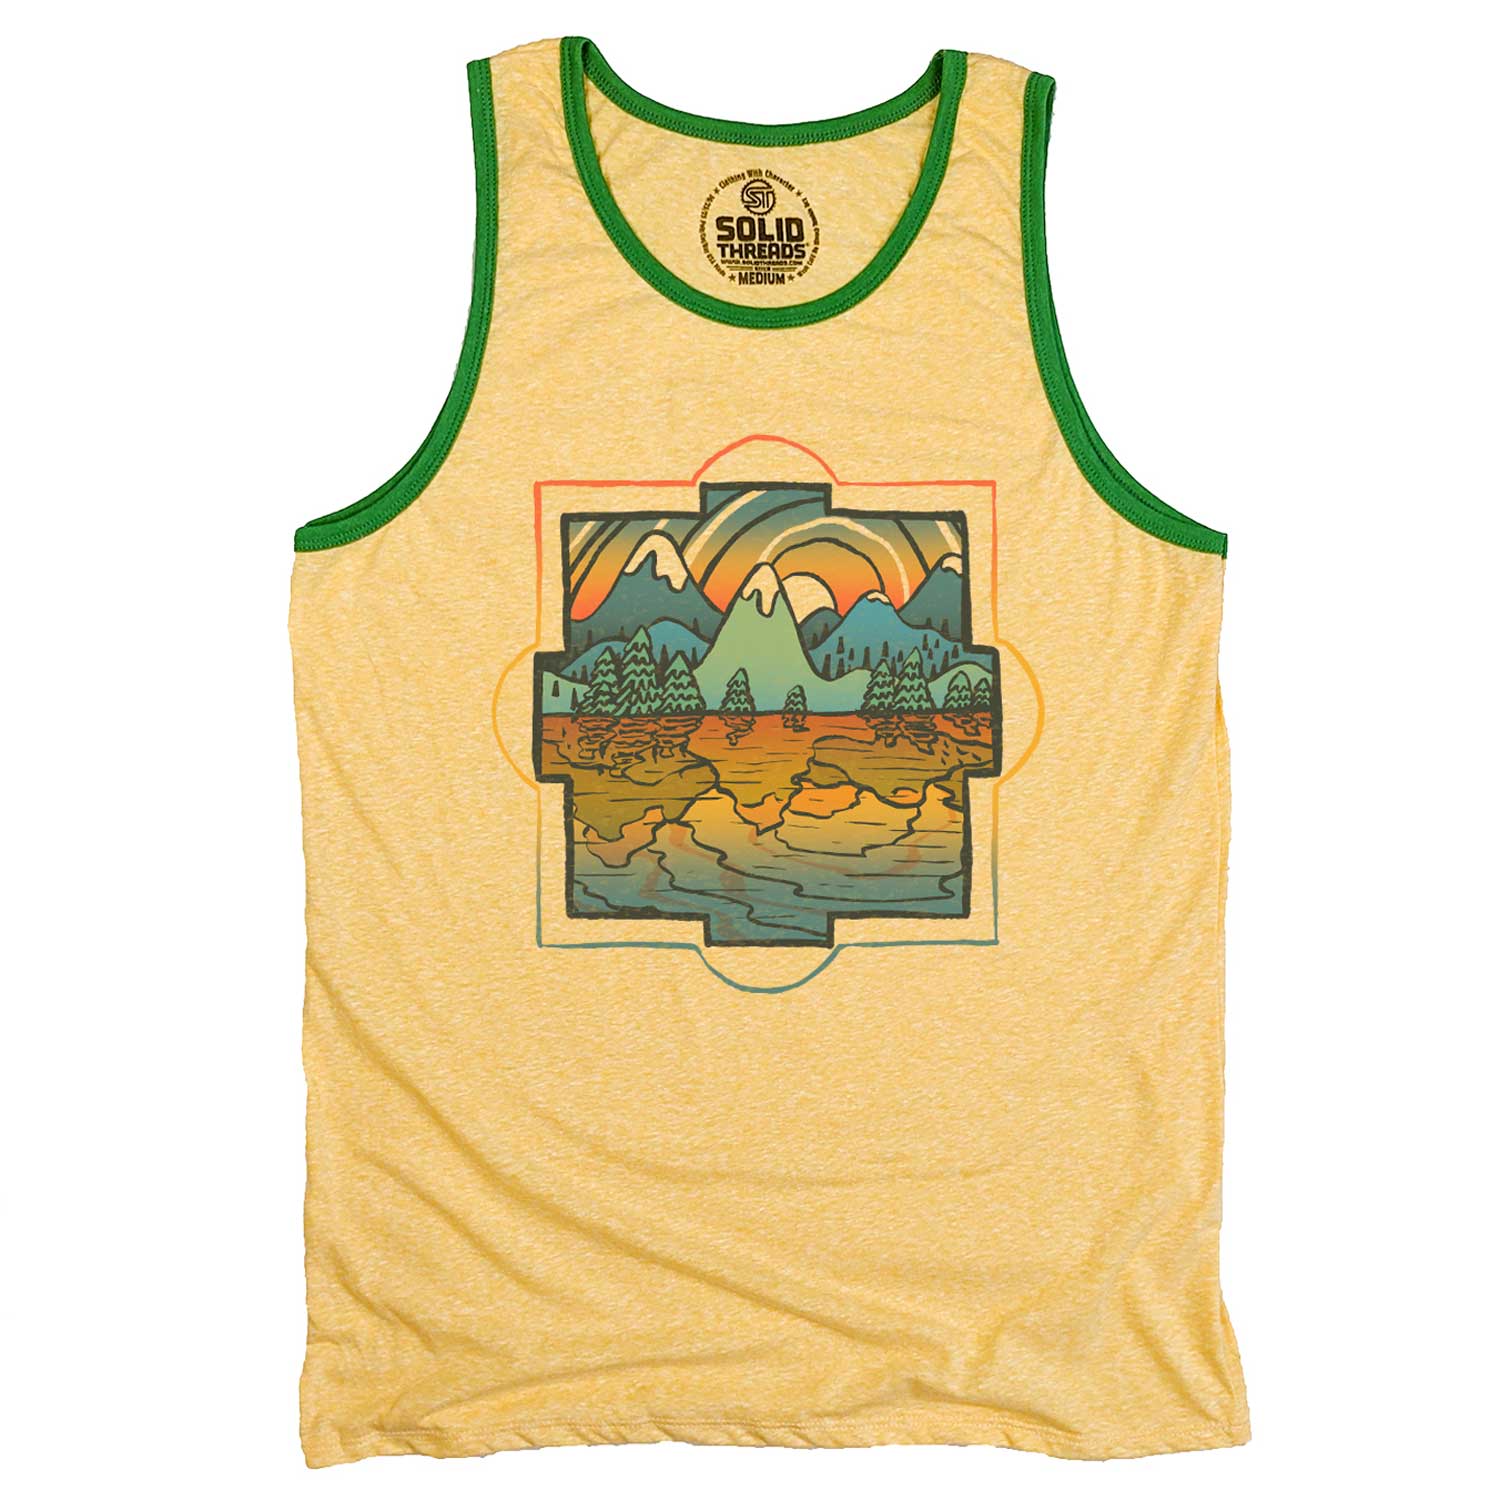 Men's Reflections Vintage Graphic Tank Top | Cool Nature Landscape Sleeveless Shirt | Solid Threads